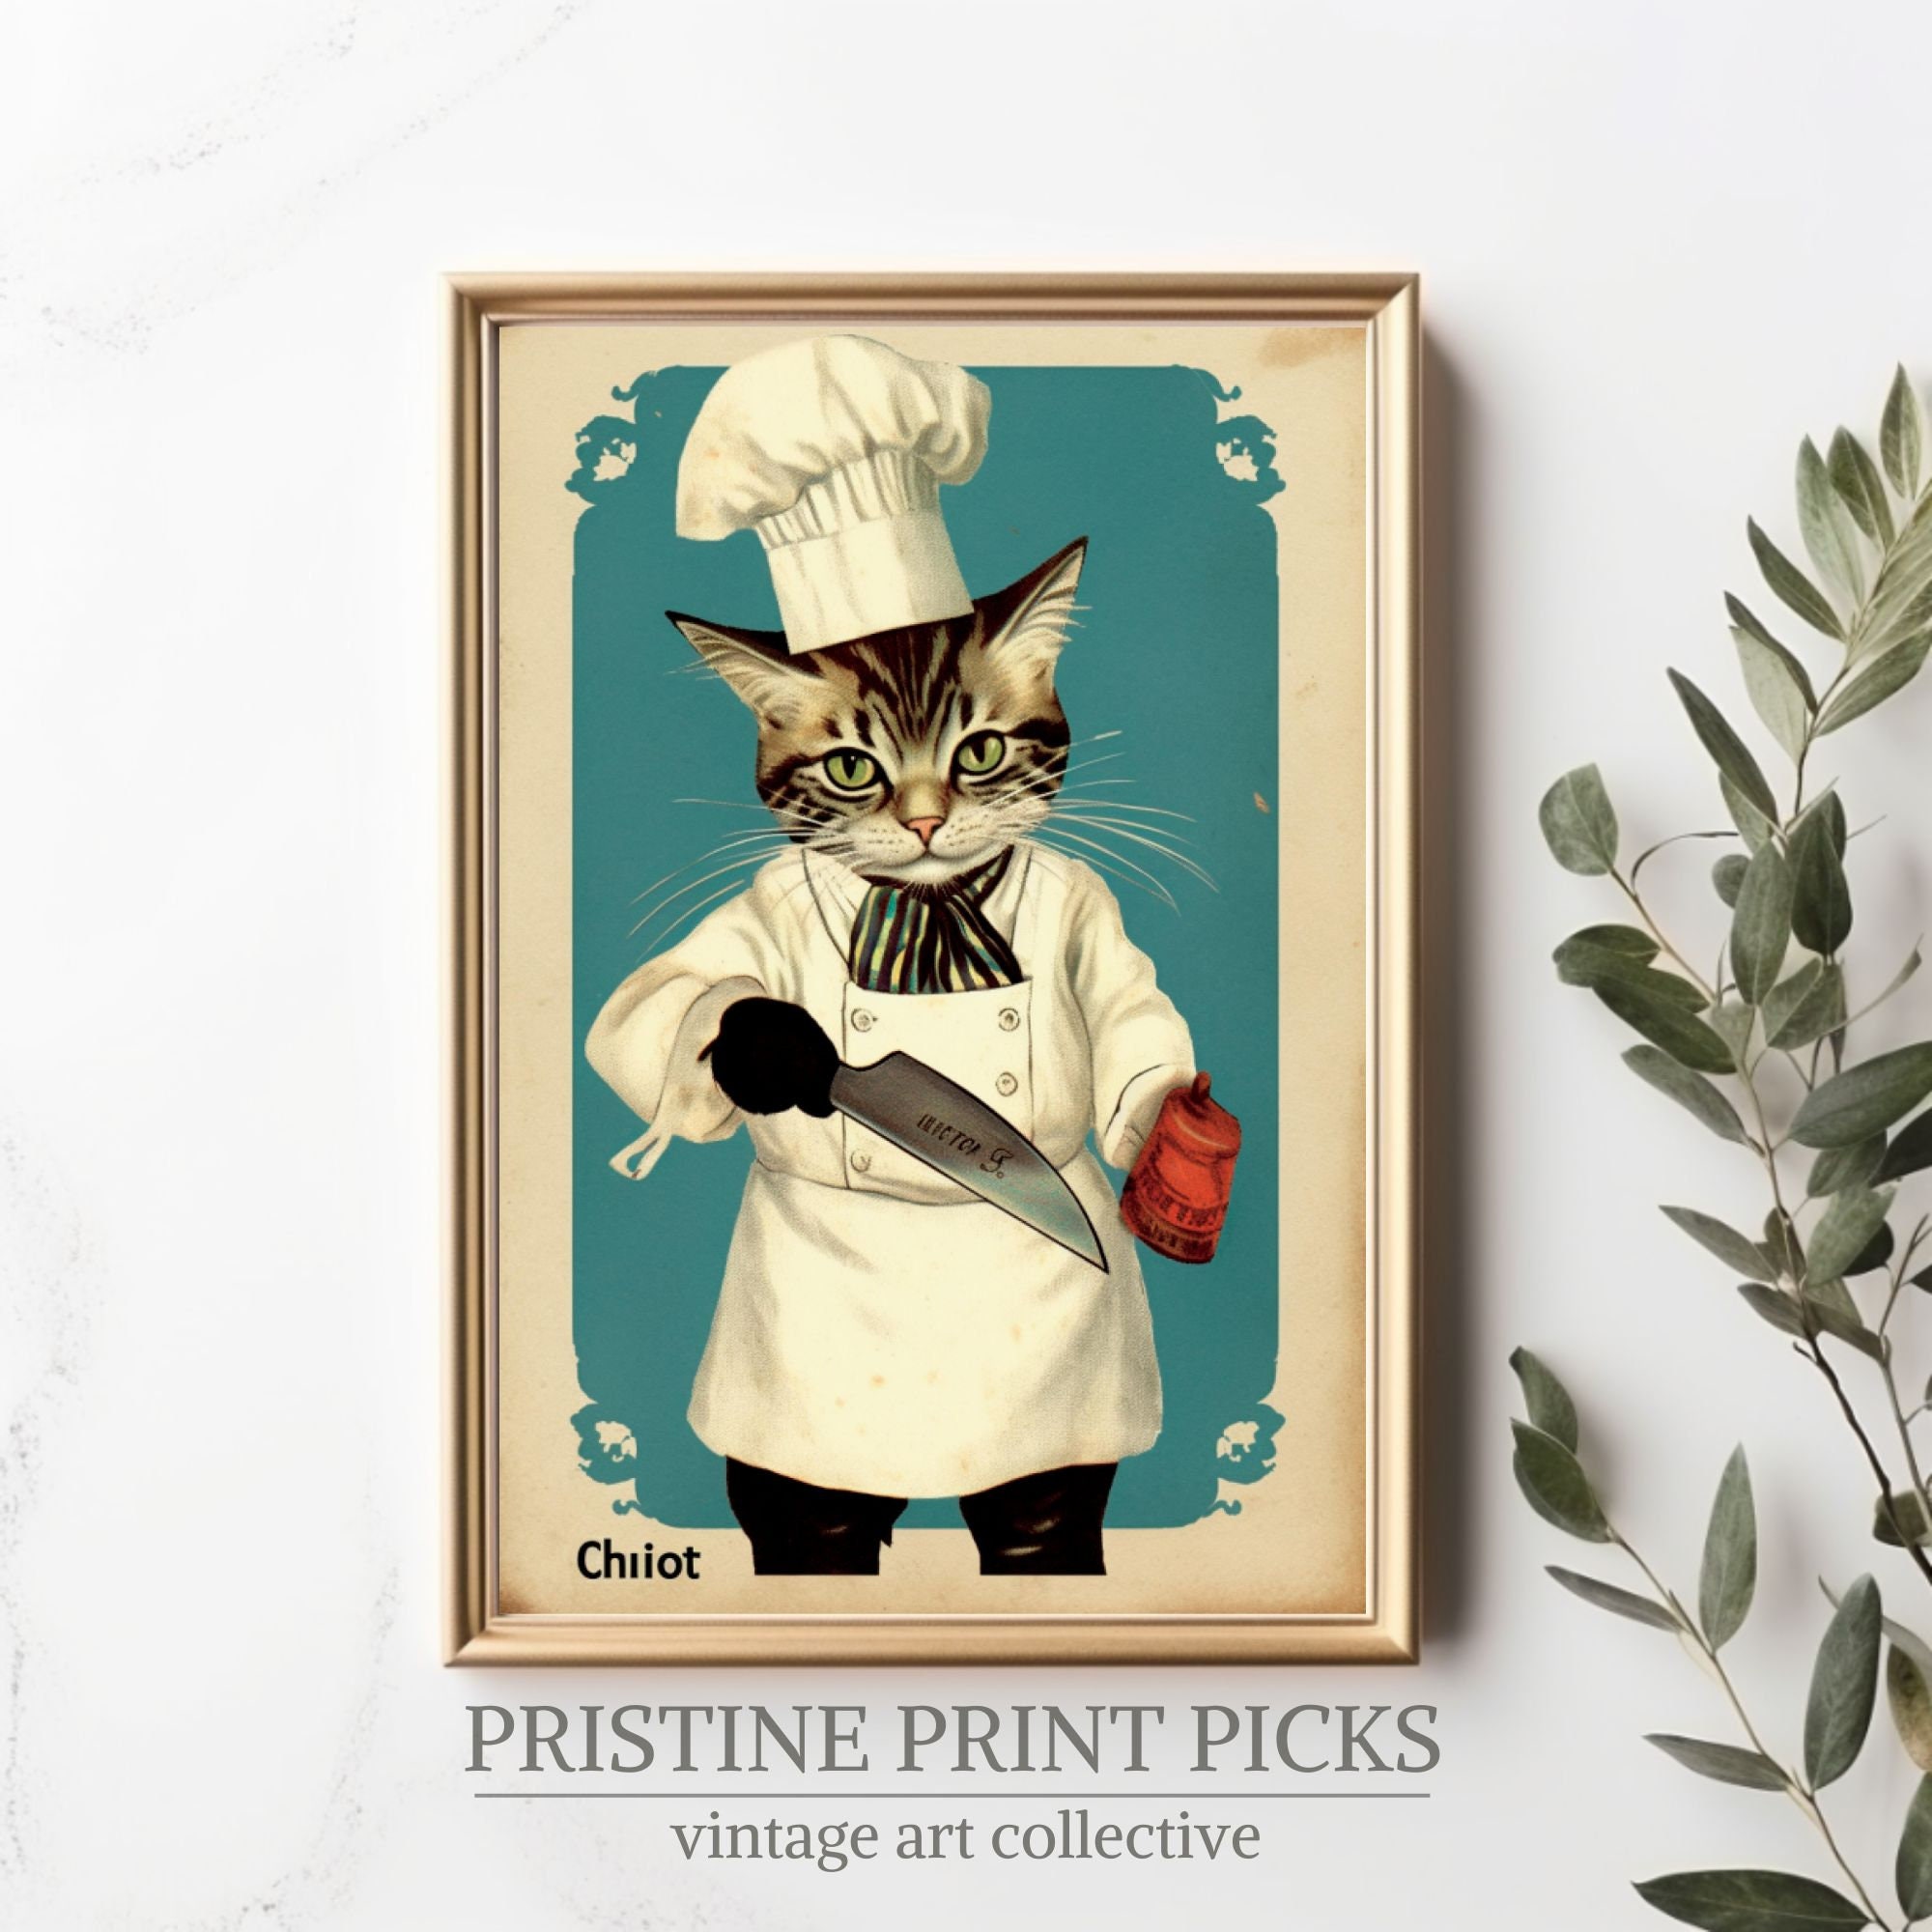  Funny Kitchen Art Anthropomorphic cat art vintage retro Old  World Whimsical altered photo Funny Cat meme Inspirational quote Positive  print Cooking Baking Bakery decor Dorm Decor Affirmation : Handmade Products